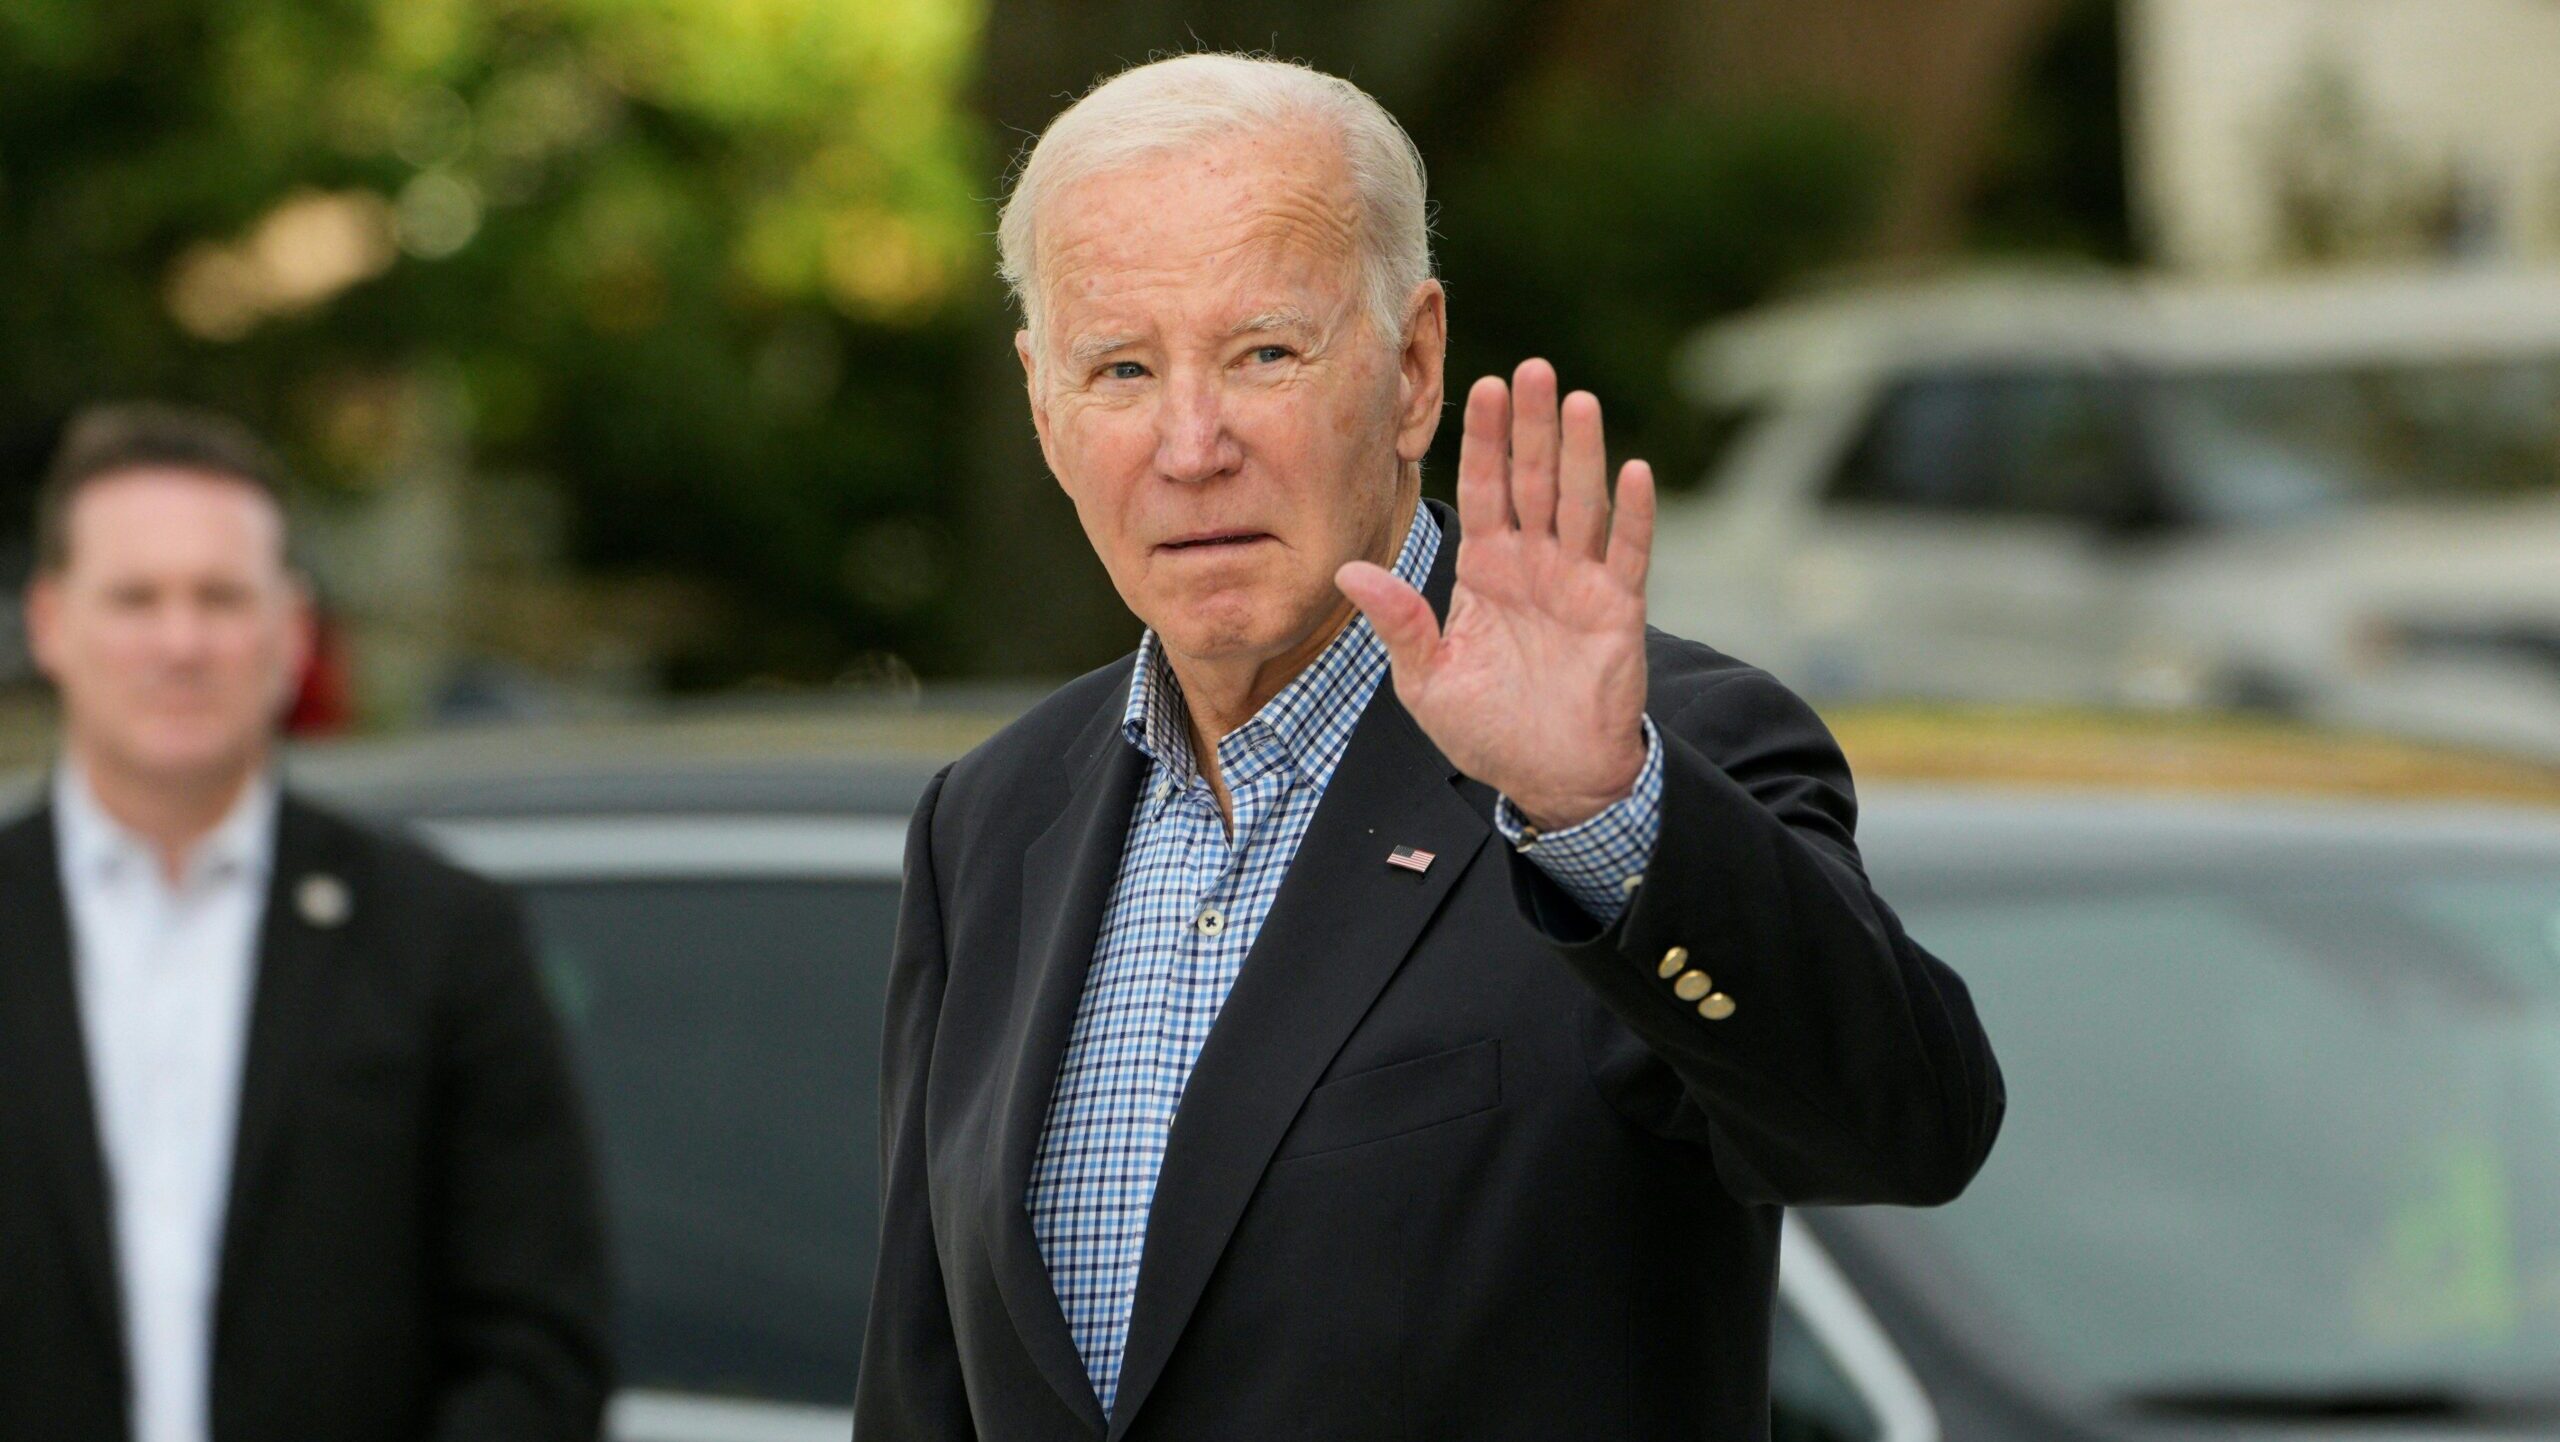 With Stakes High, US President Biden Aligns With Israel at War